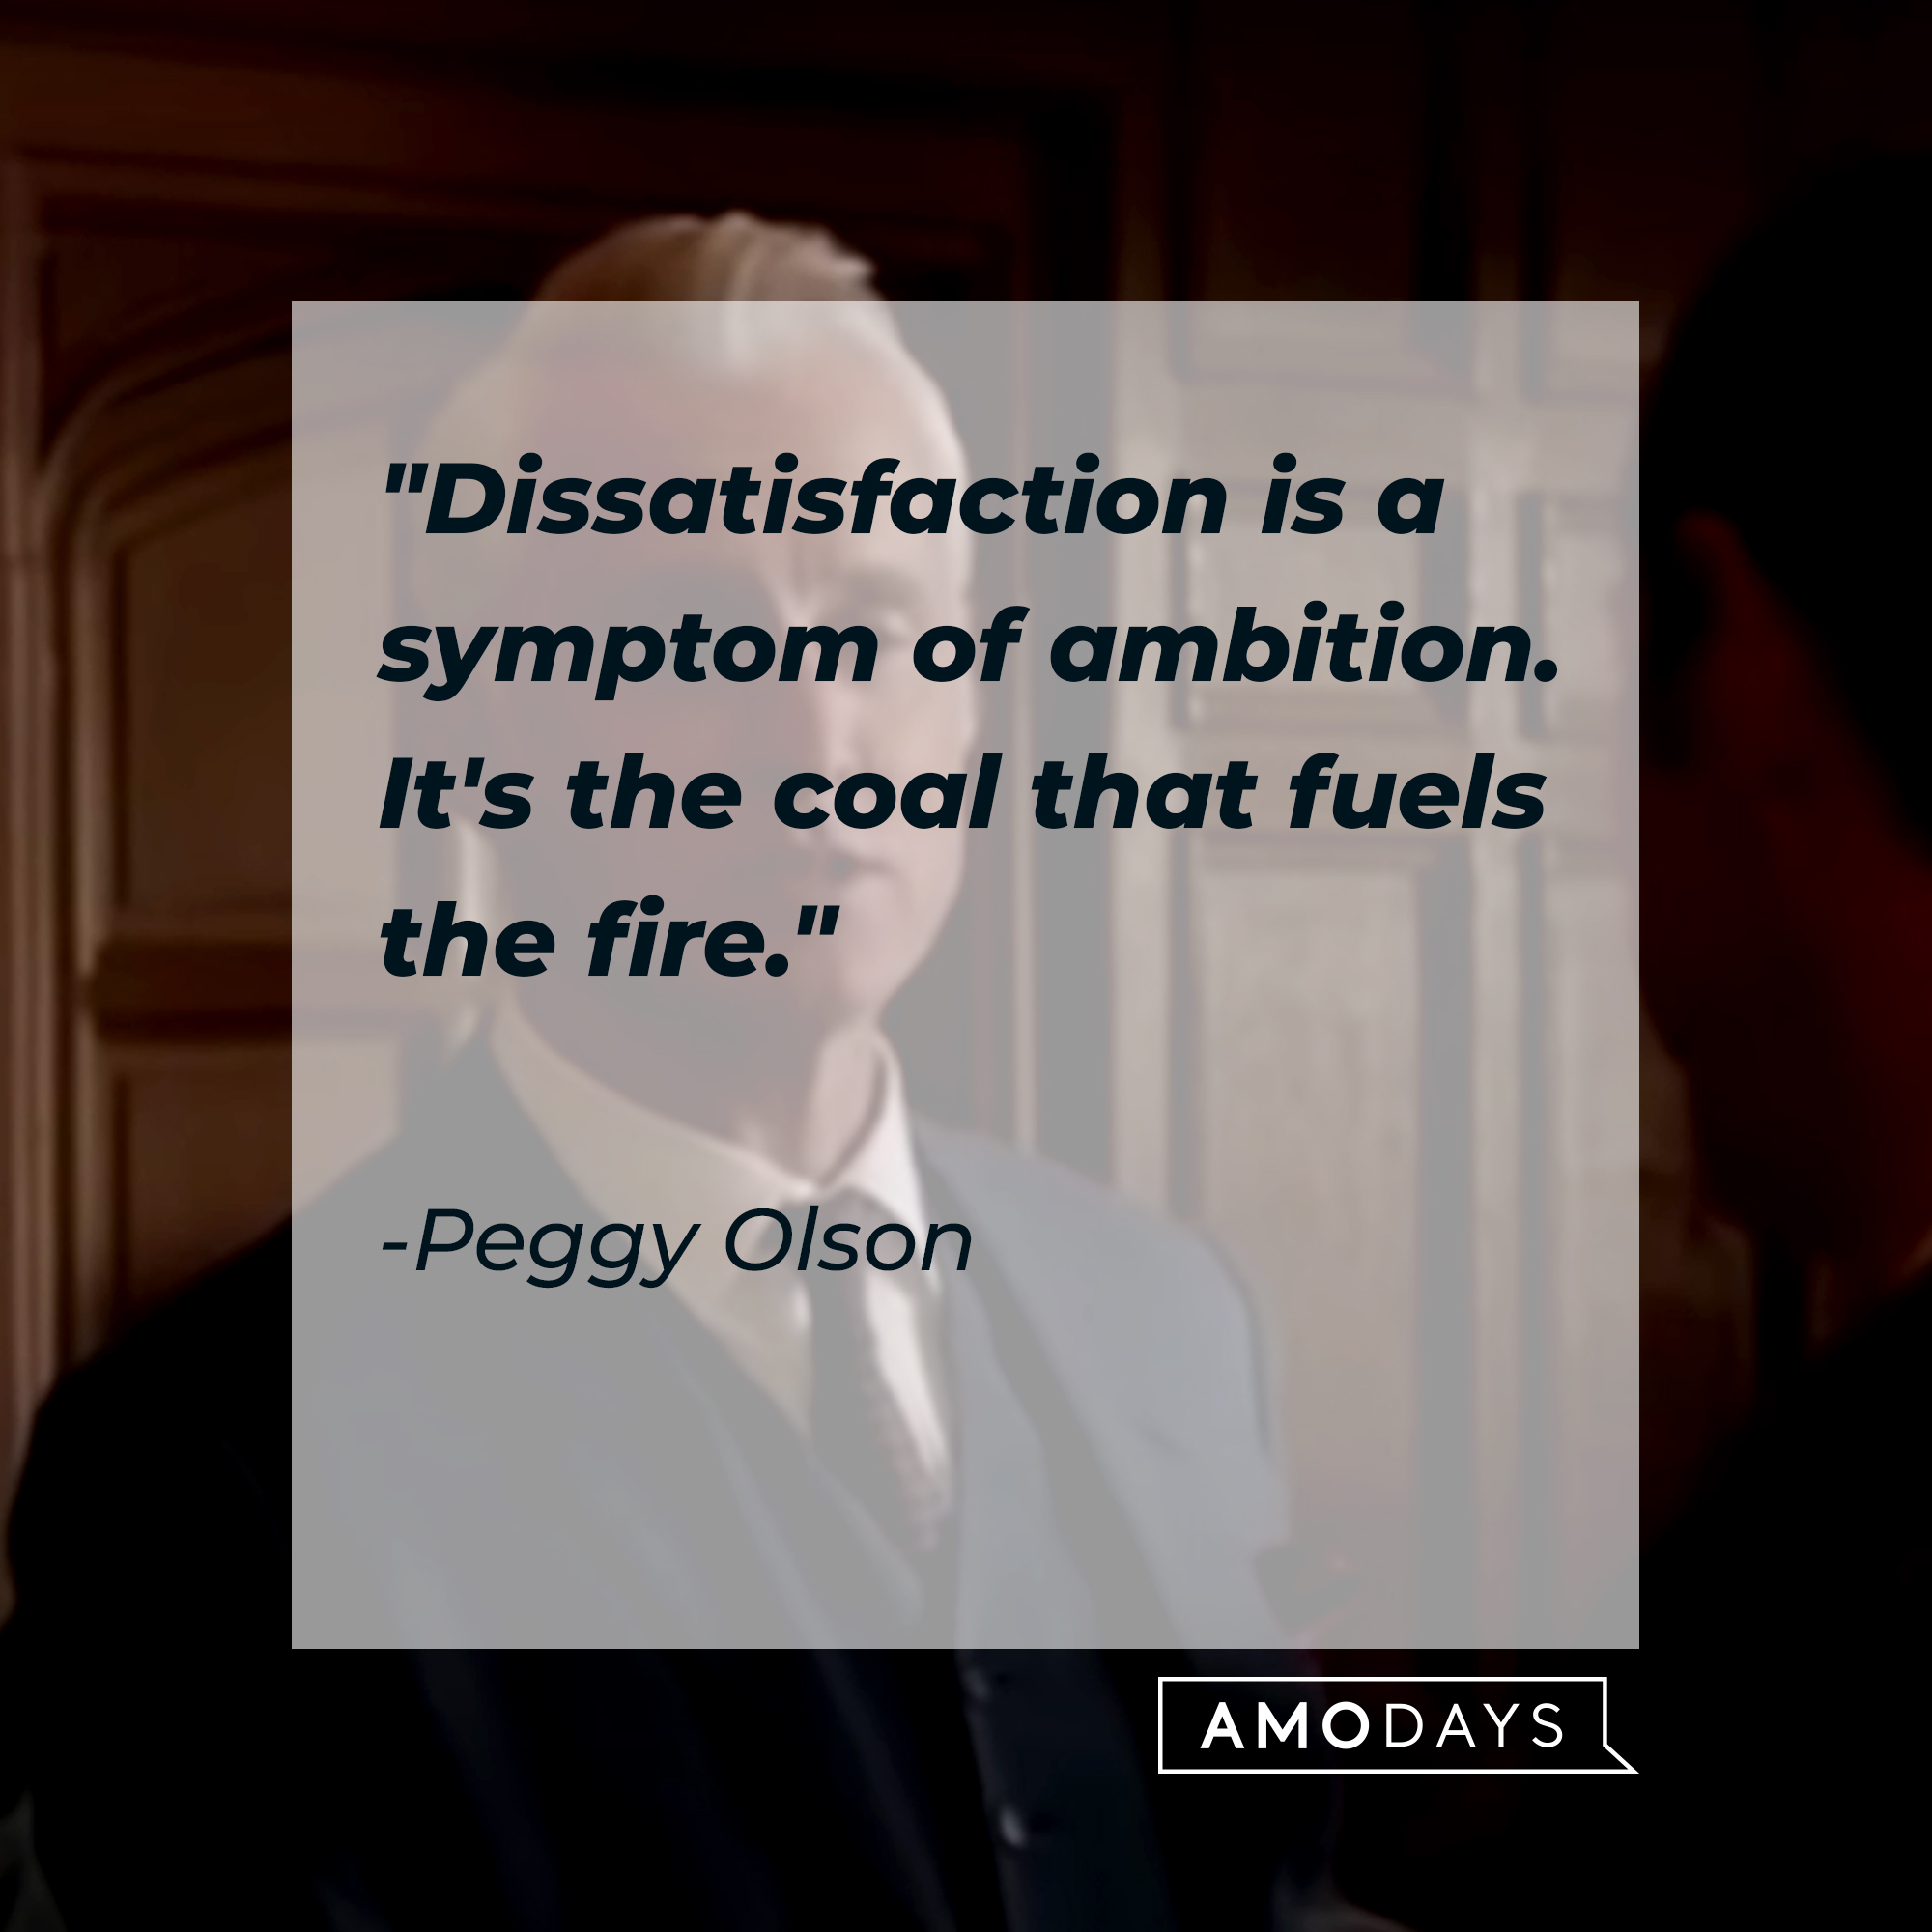 Peggy Olson's quote: "Dissatisfaction is a symptom of ambition. It's the coal that fuels the fire." | Source: Facebook.com/MadMen